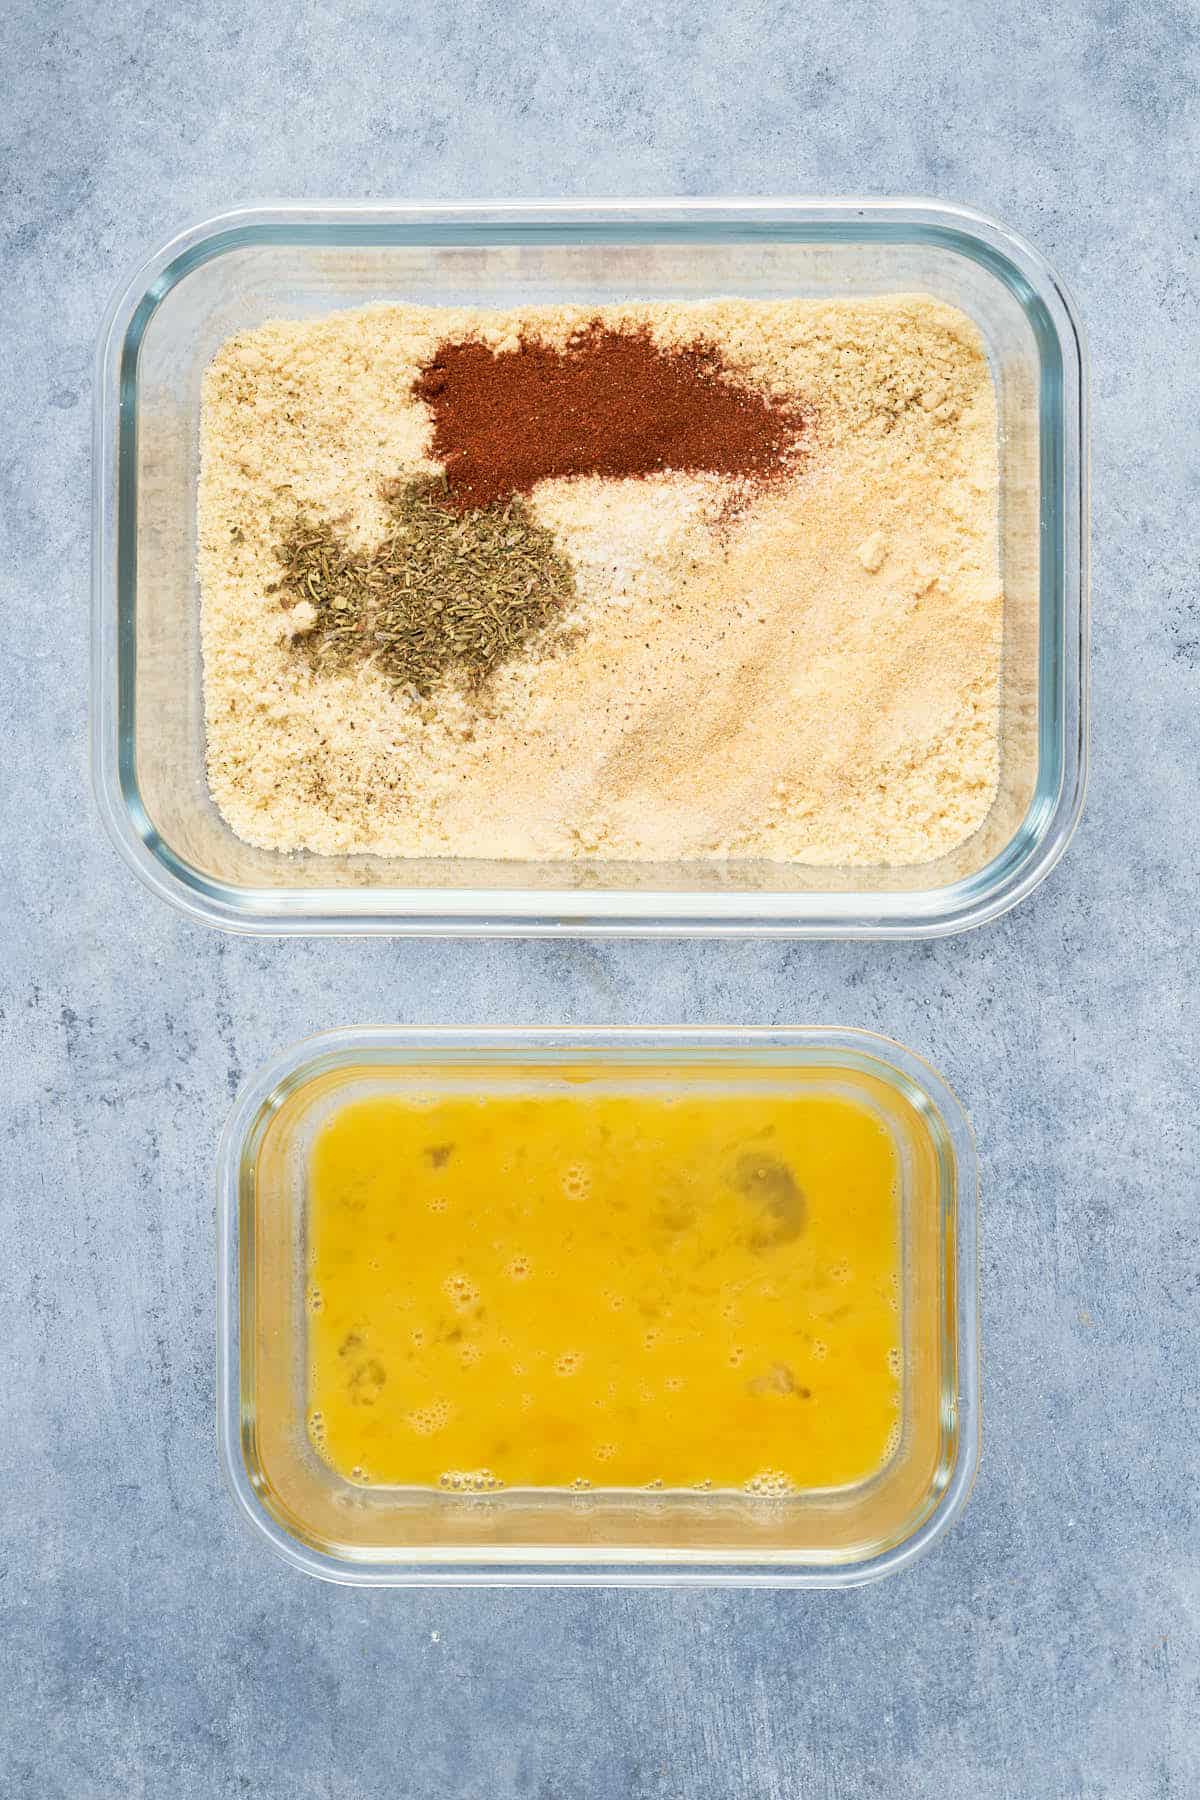 In one bowl, combine the spices and flour to coat the chicken. The other bowl with lightly beaten egg.